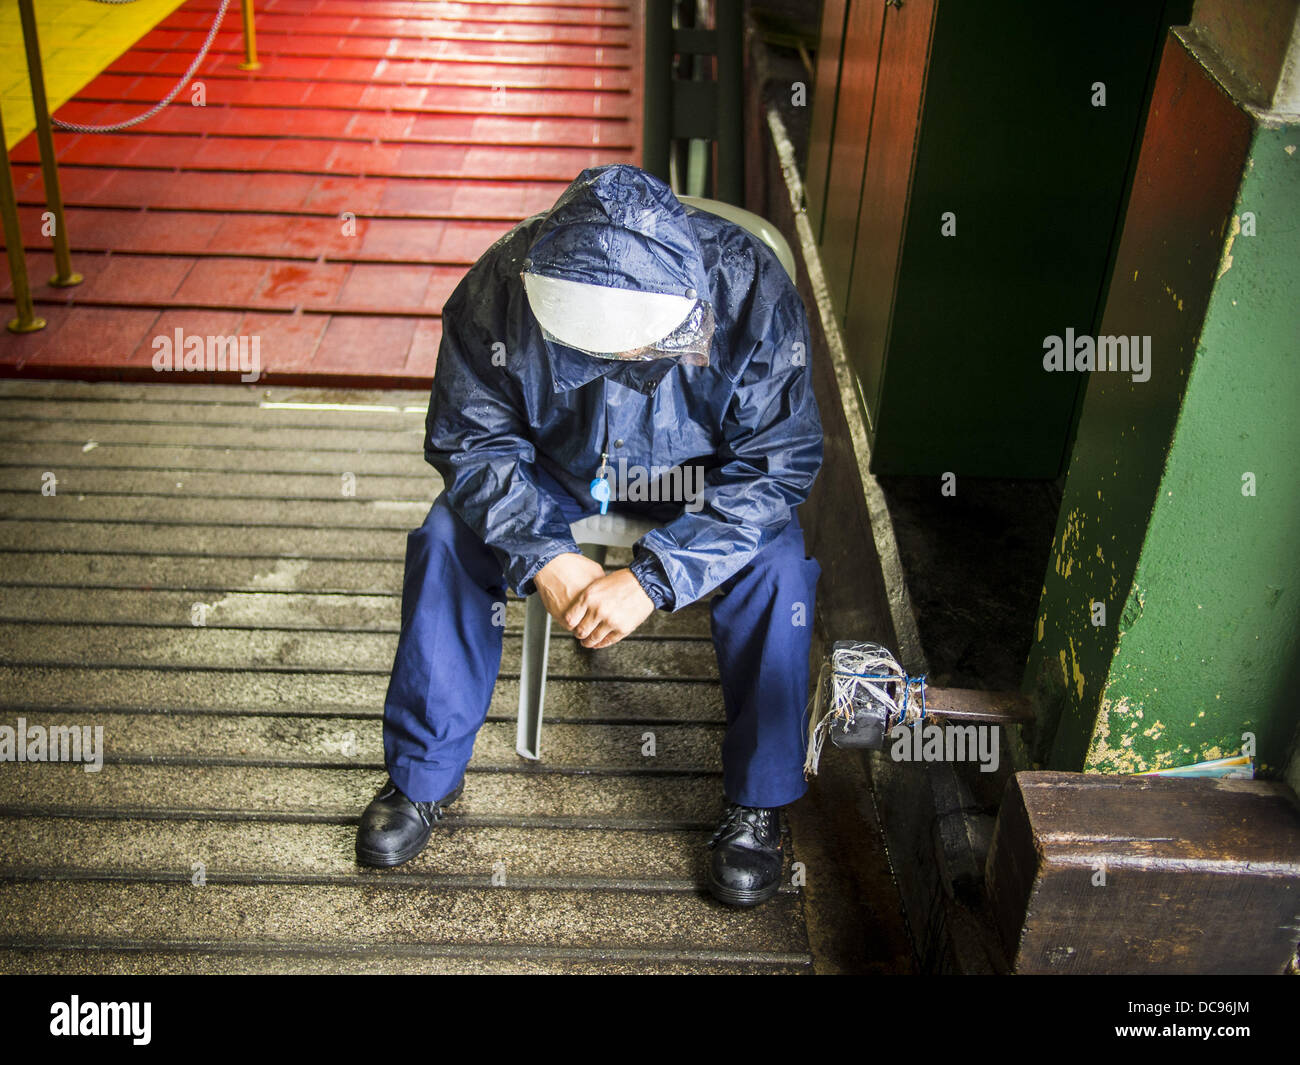 Hong Kong. 13th August 2013.  A Star Ferry worker takes shelter on a ferry gangway and waits out rains from Typhoon Utor in Hong Kong. Typhoon Utor (known in the Philippines as Typhoon Labuyo) is an active tropical cyclone located over the South China Sea. The eleventh named storm and second typhoon of the 2013 typhoon season, Utor formed from a tropical depression on August 8. The depression was upgraded to Tropical Storm Utor the following day, and to typhoon intensity just a few hours afterwards. Credit:  ZUMA Press, Inc./Alamy Live News Stock Photo